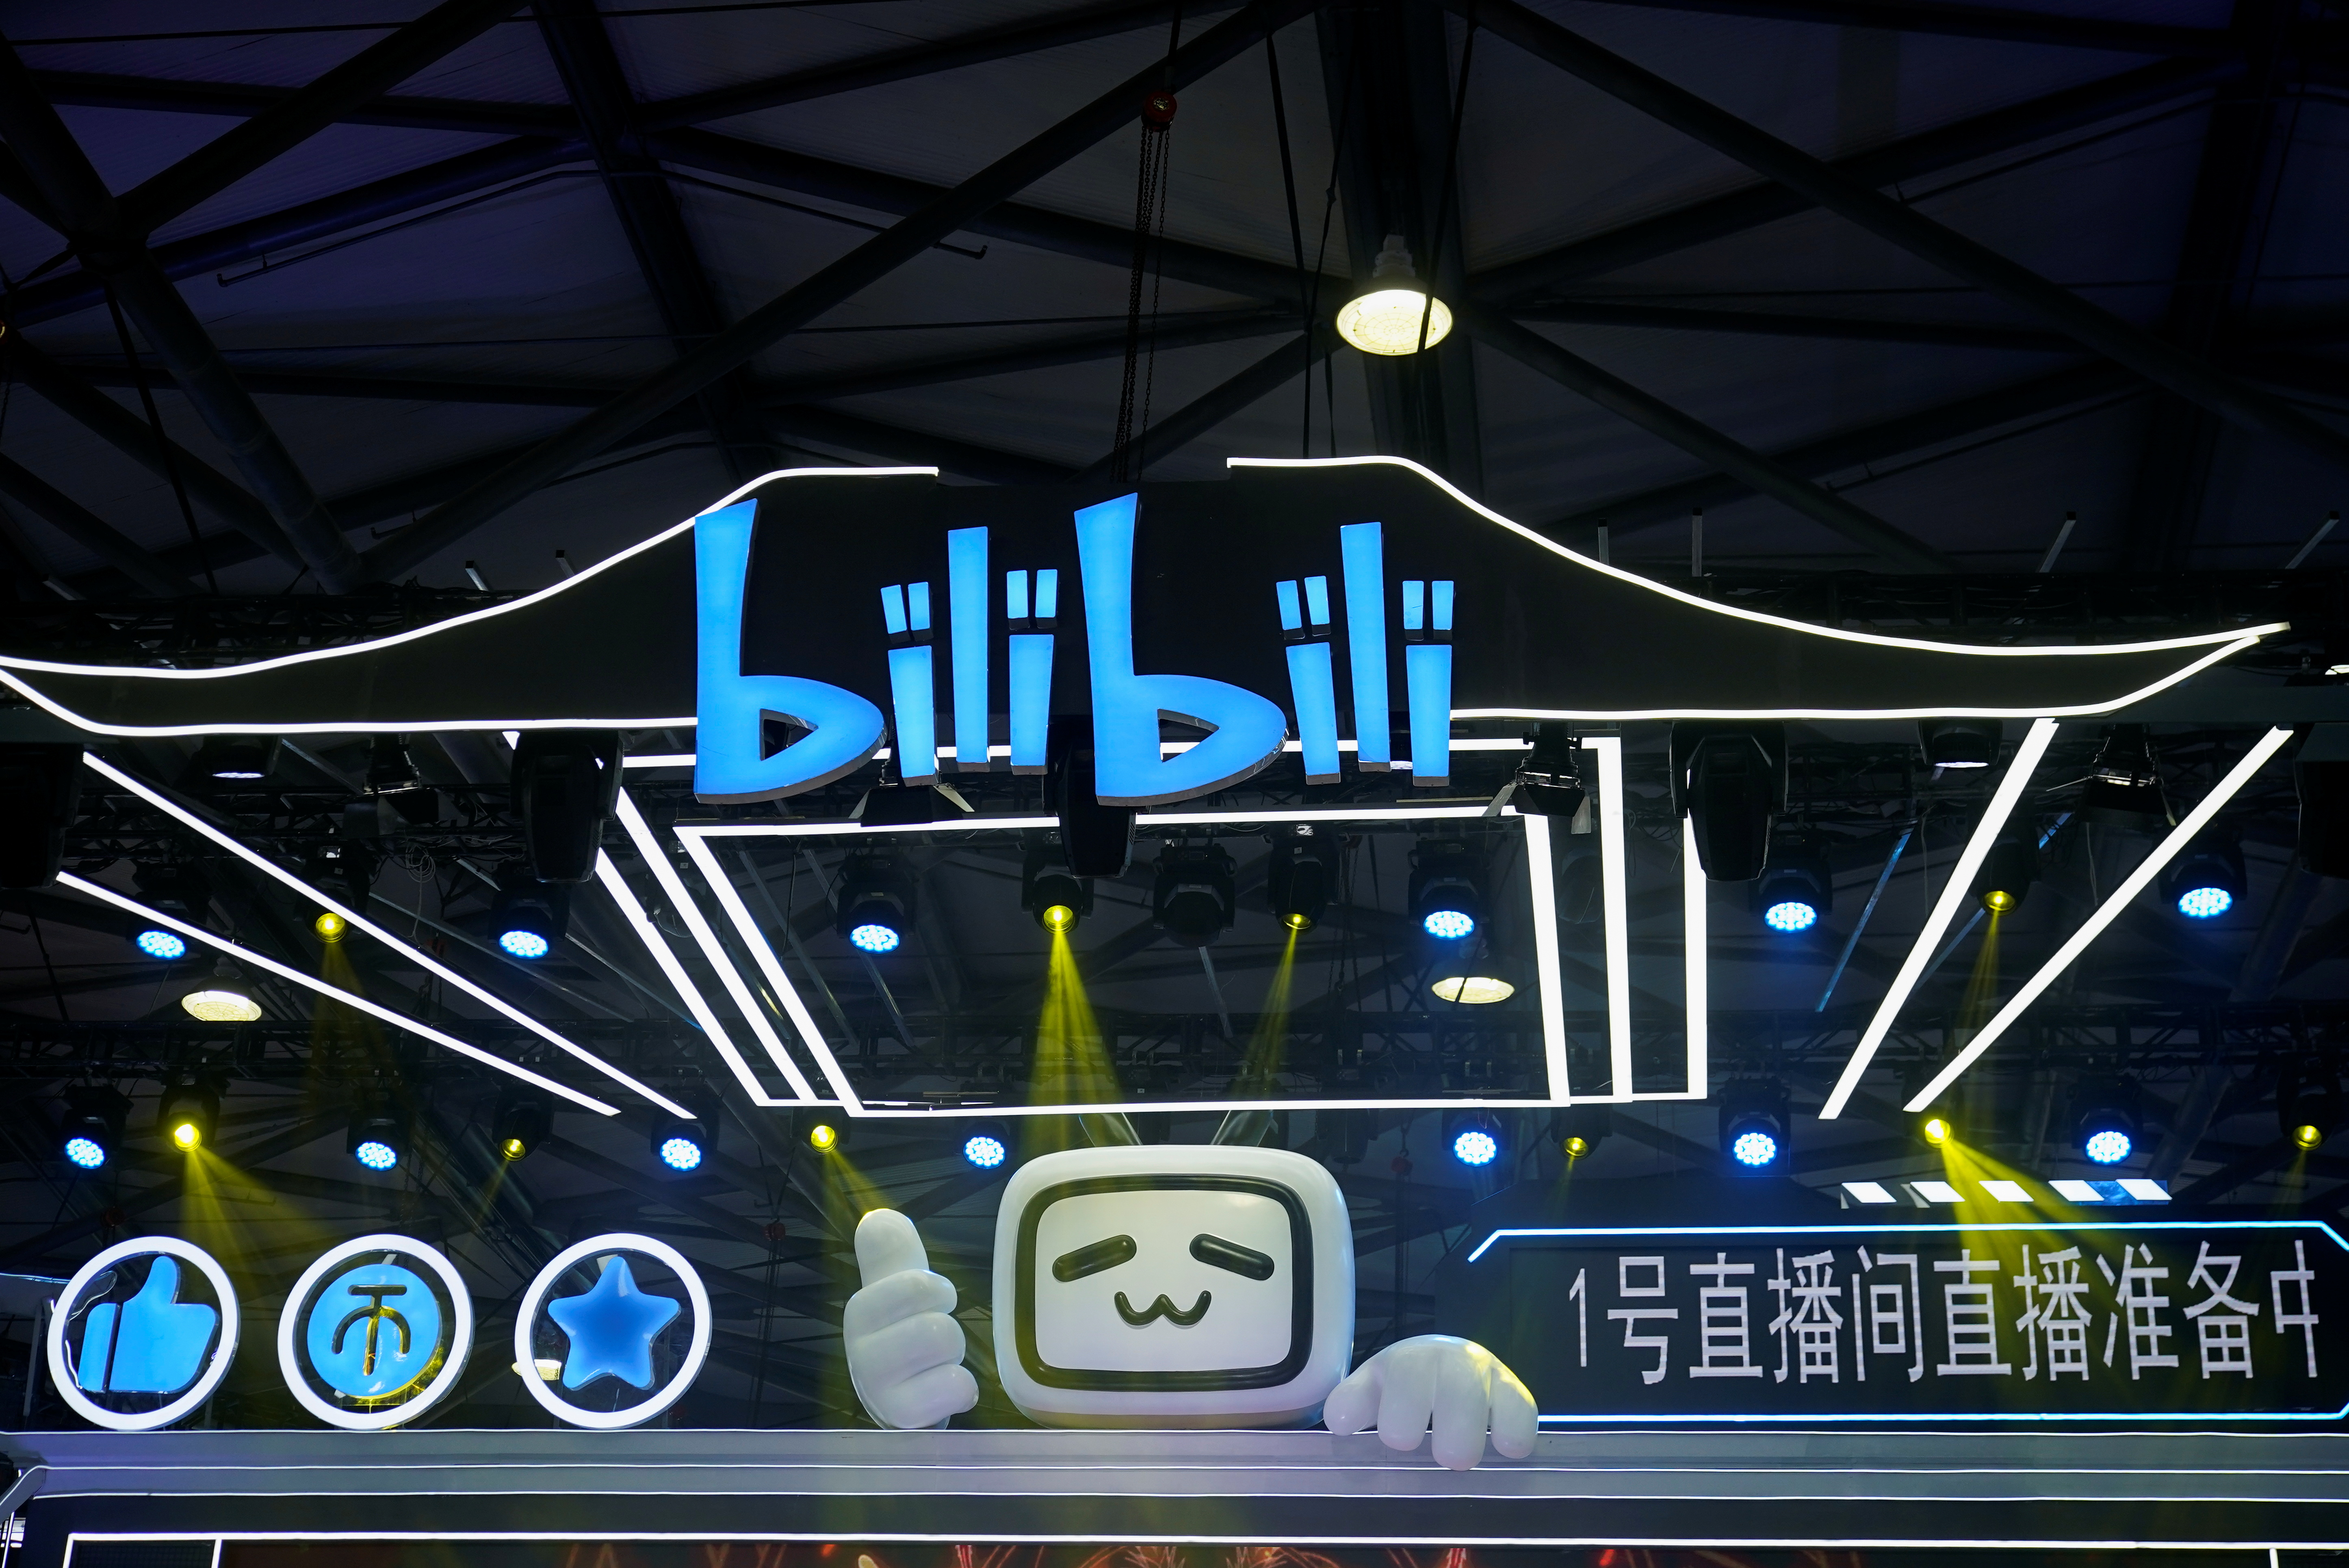 The logo of online video site Bilibili Inc is seen at the China Digital Entertainment Expo and Conference, also known as ChinaJoy, in Shanghai